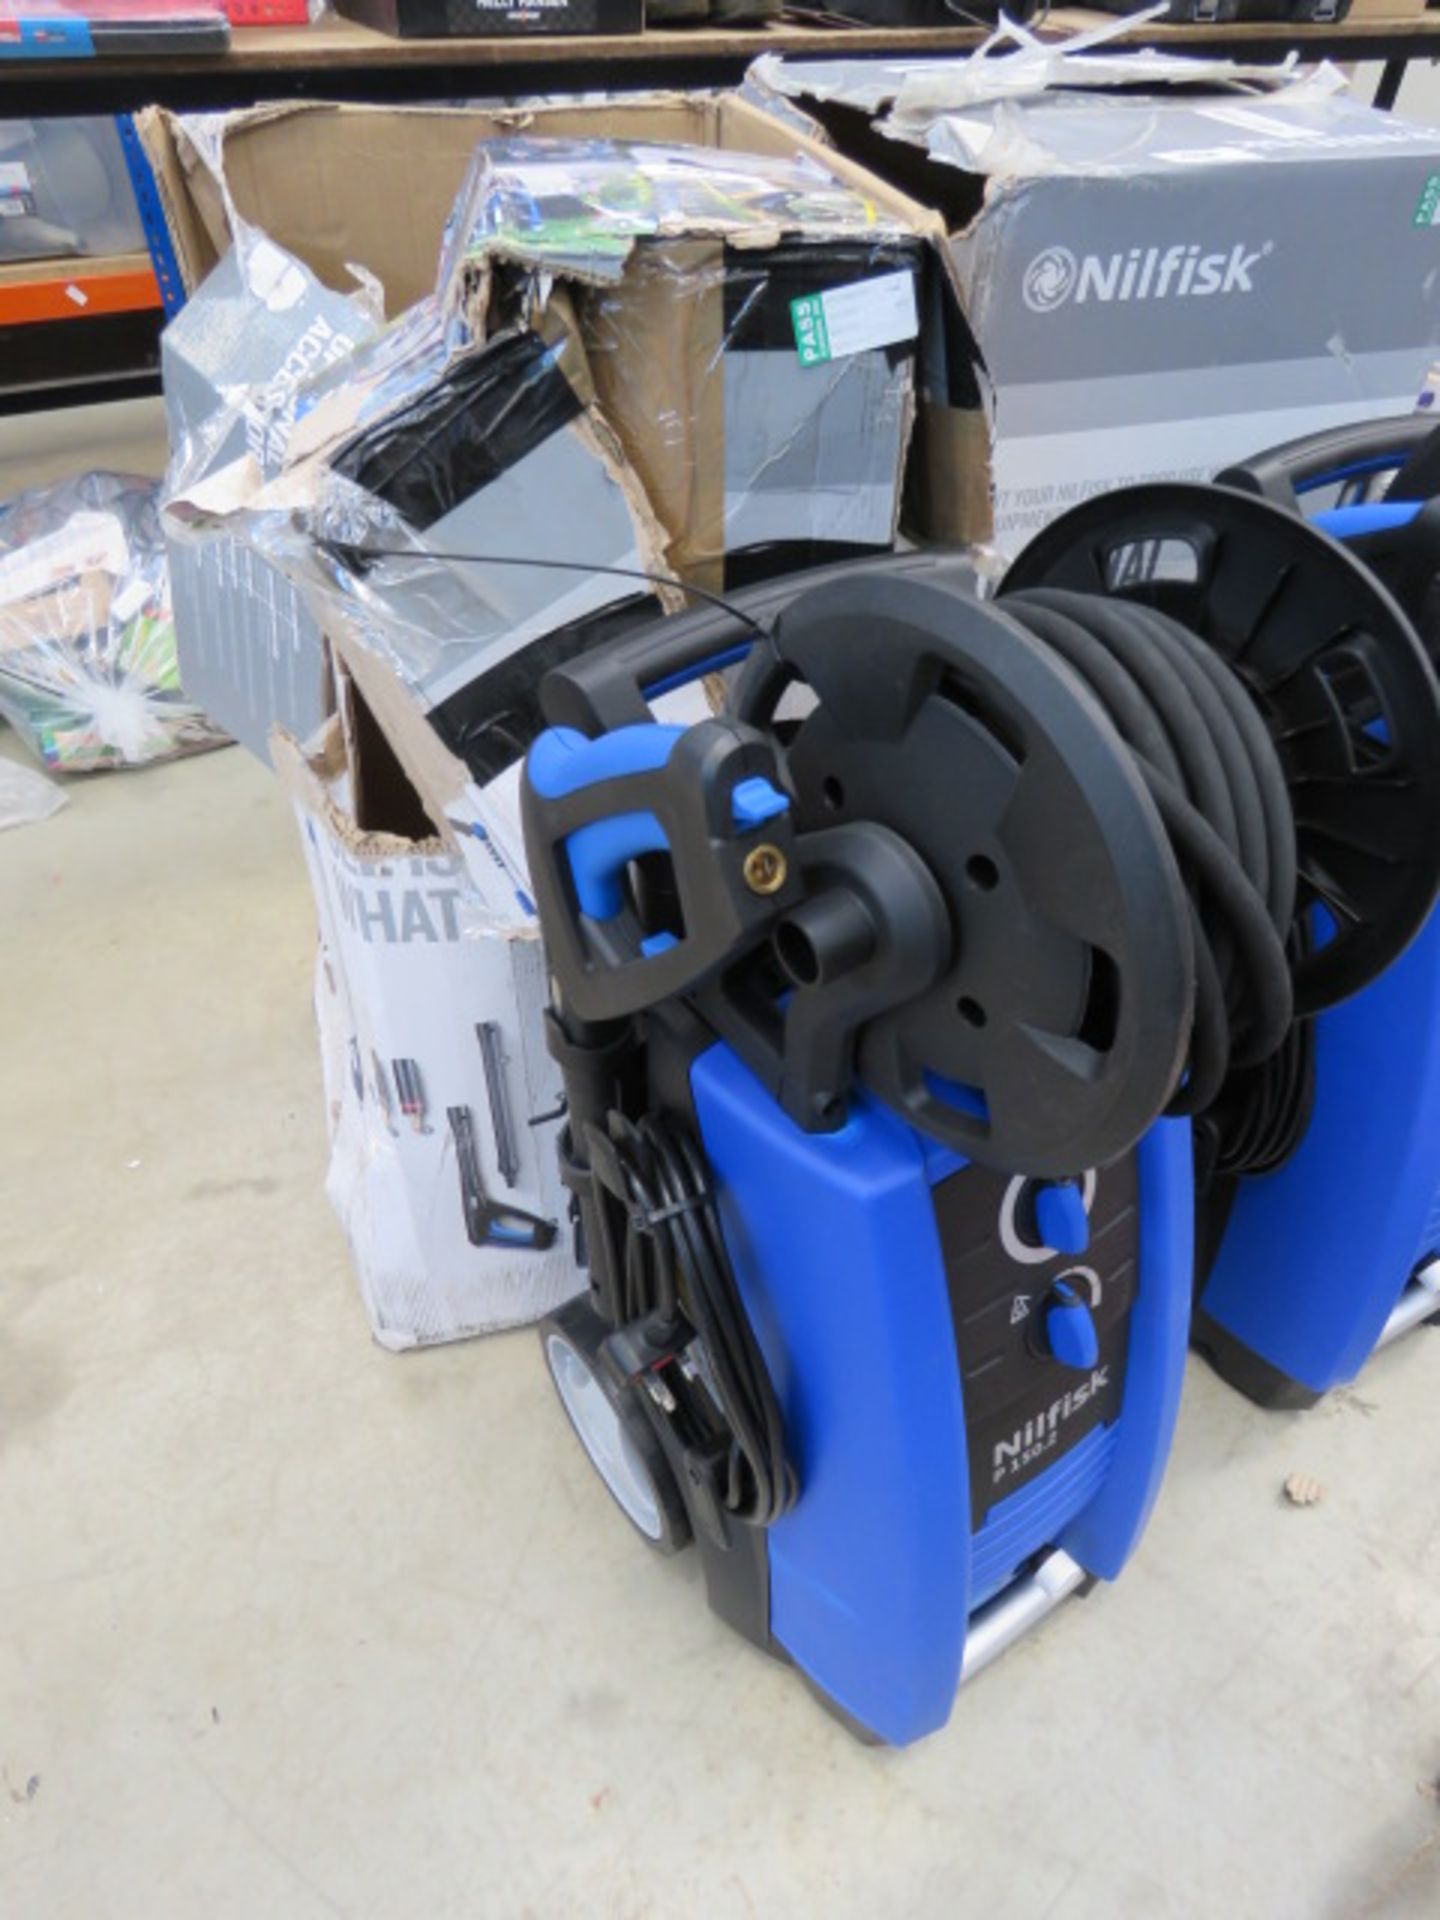 Nilfisk P1502 electric pressure washer with box